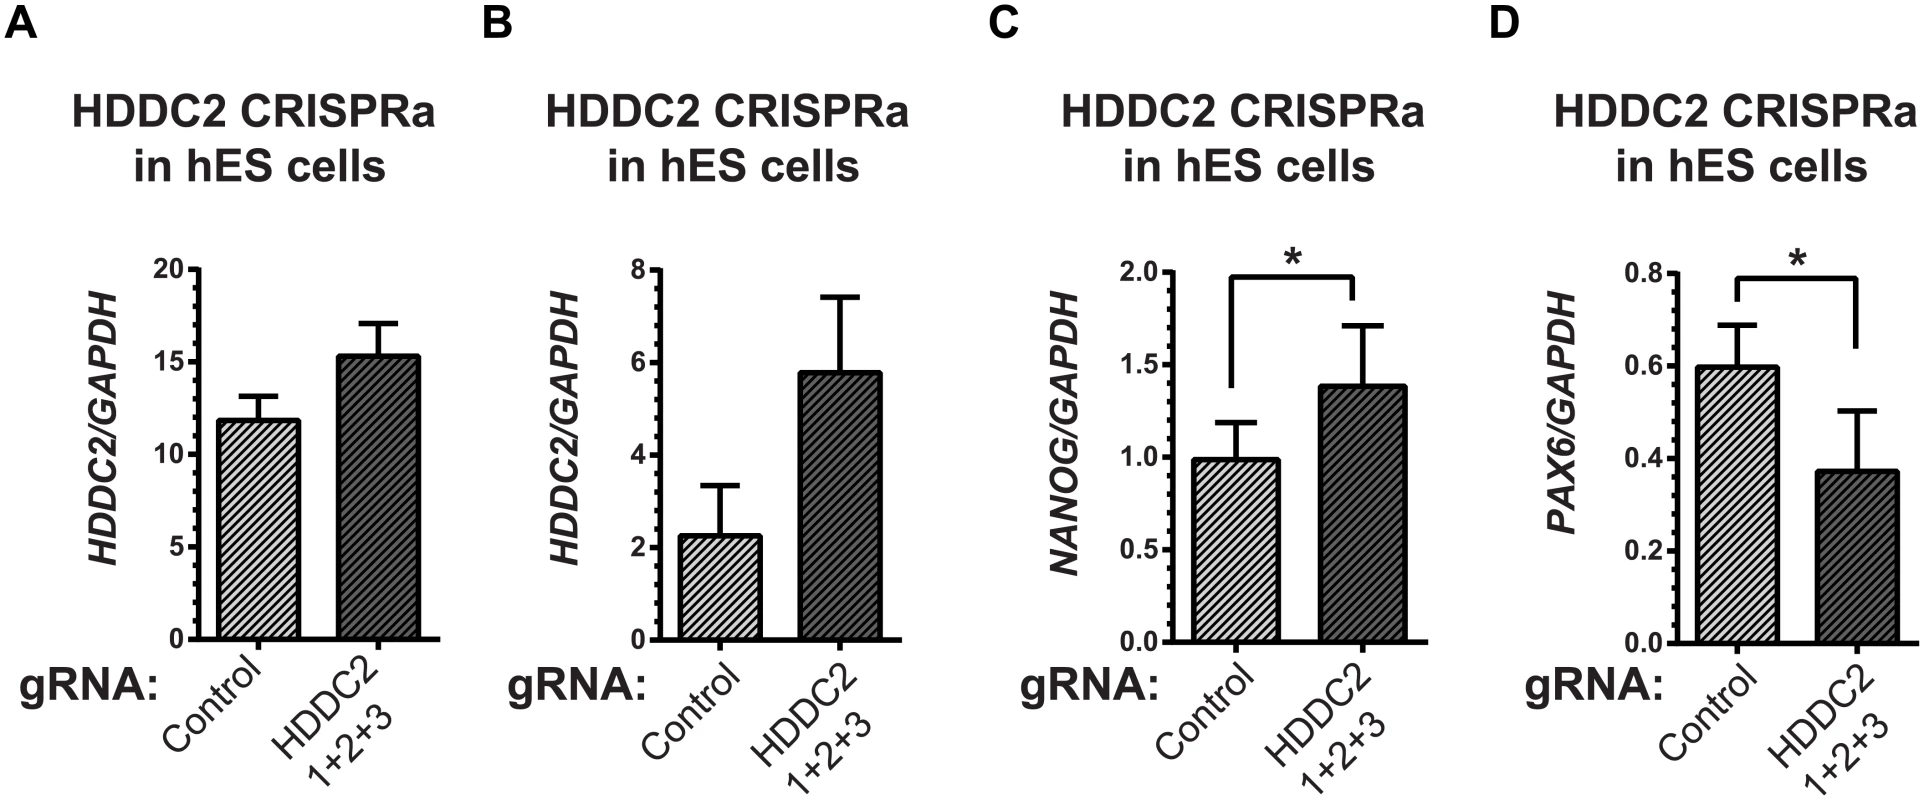 Activation of the endogenous <i>HDDC2</i> locus using an inducible Cas9-VP64 system attenuates neural differentiation of human pluripotent stem cells.